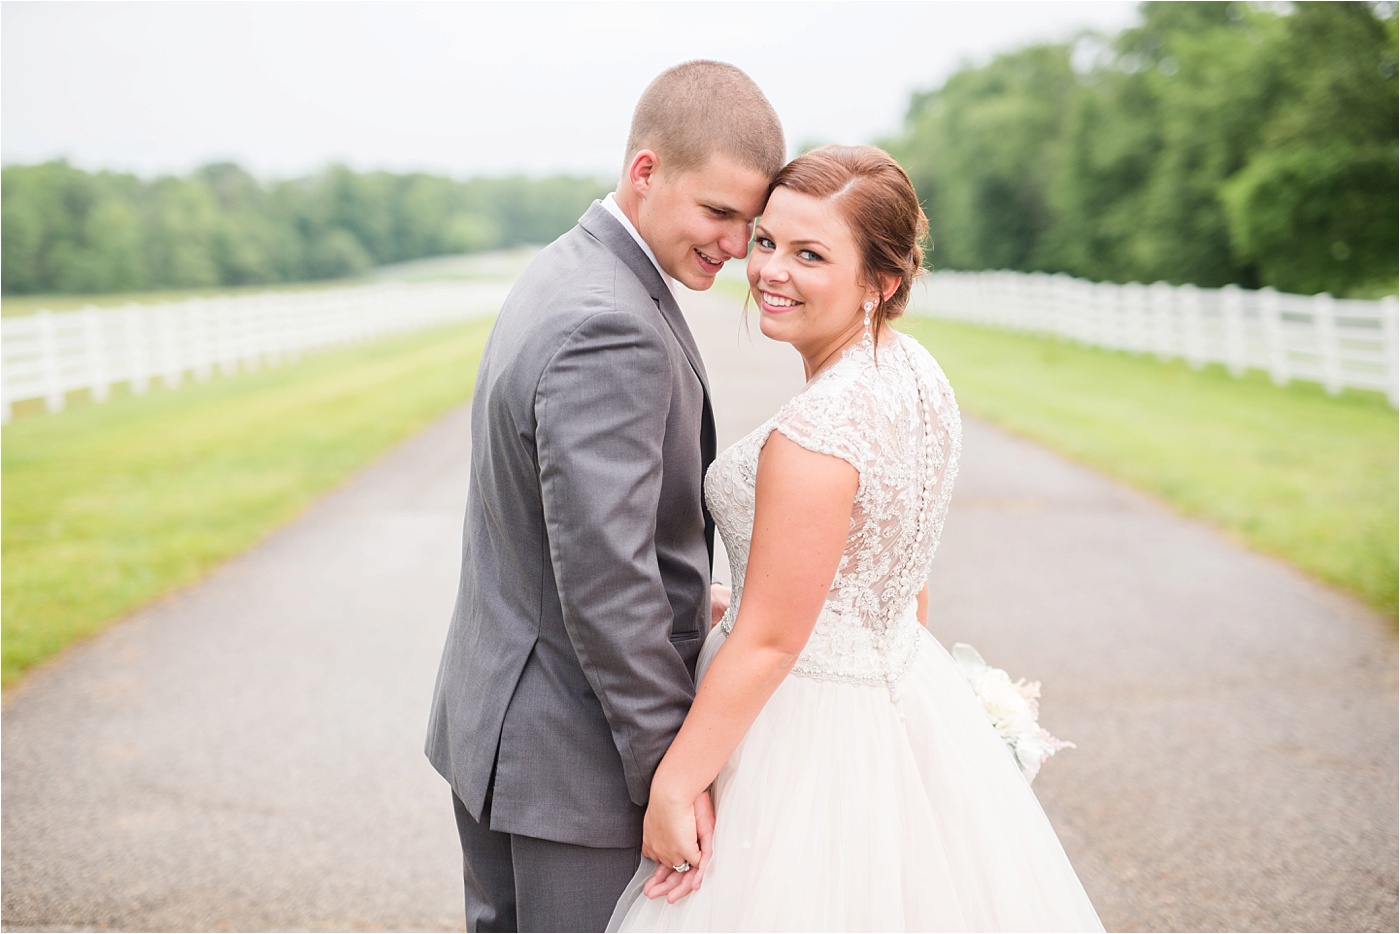 A Blush Outdoor wedding at Irongate Equestrian | KariMe Photography_0132